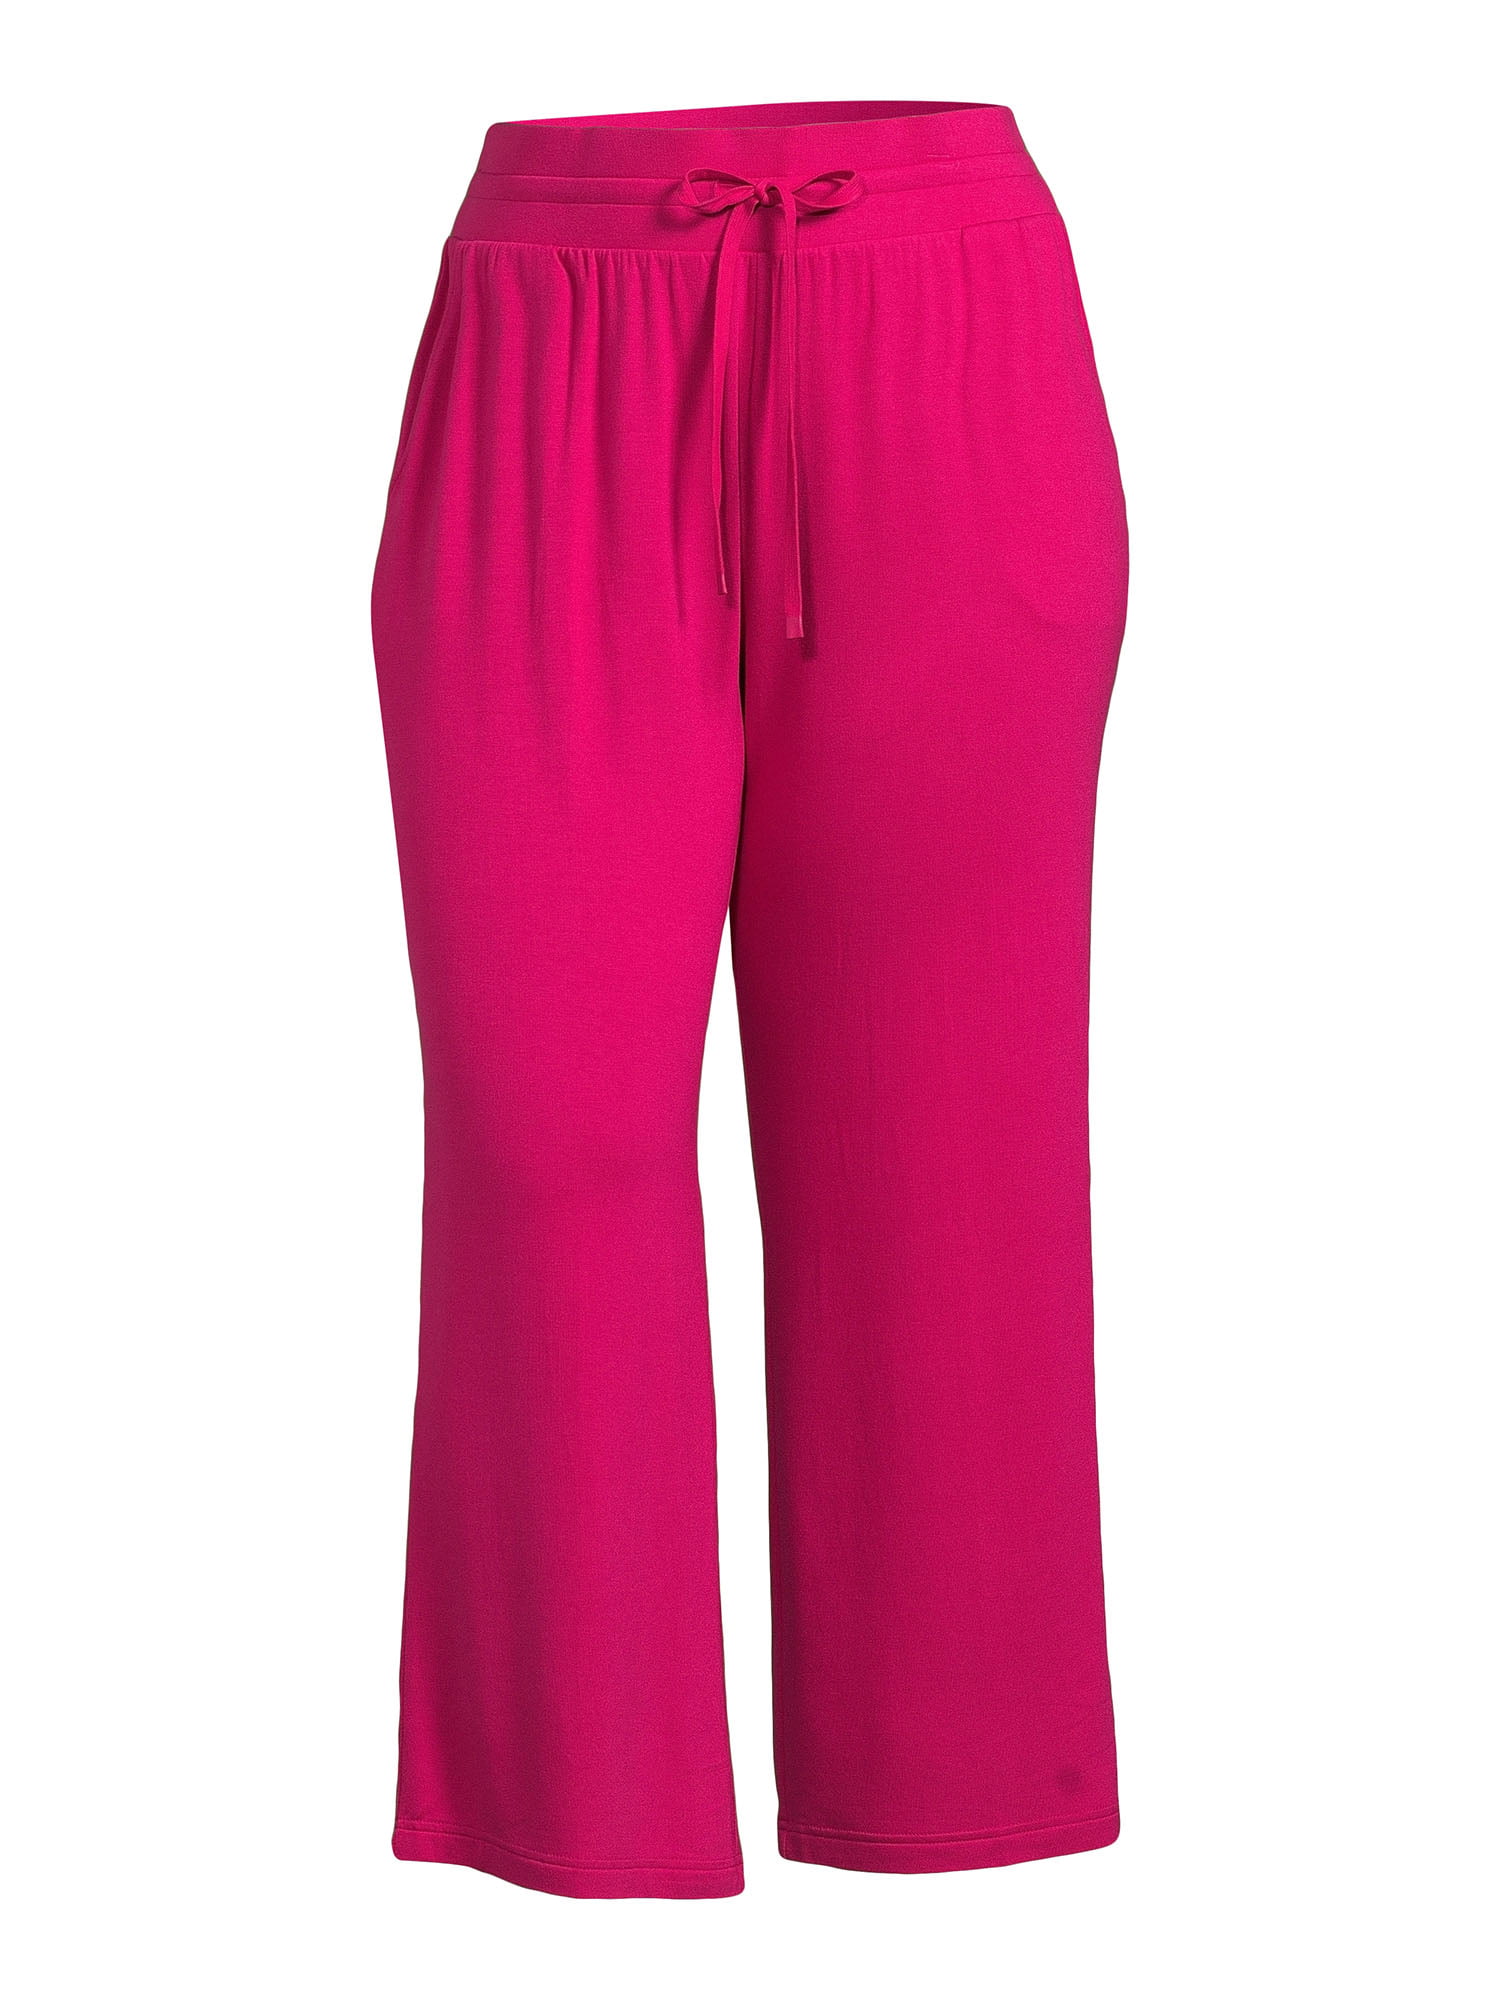 Terra & Sky Plus Size Knit Pants - Comfortable Pull-On Style